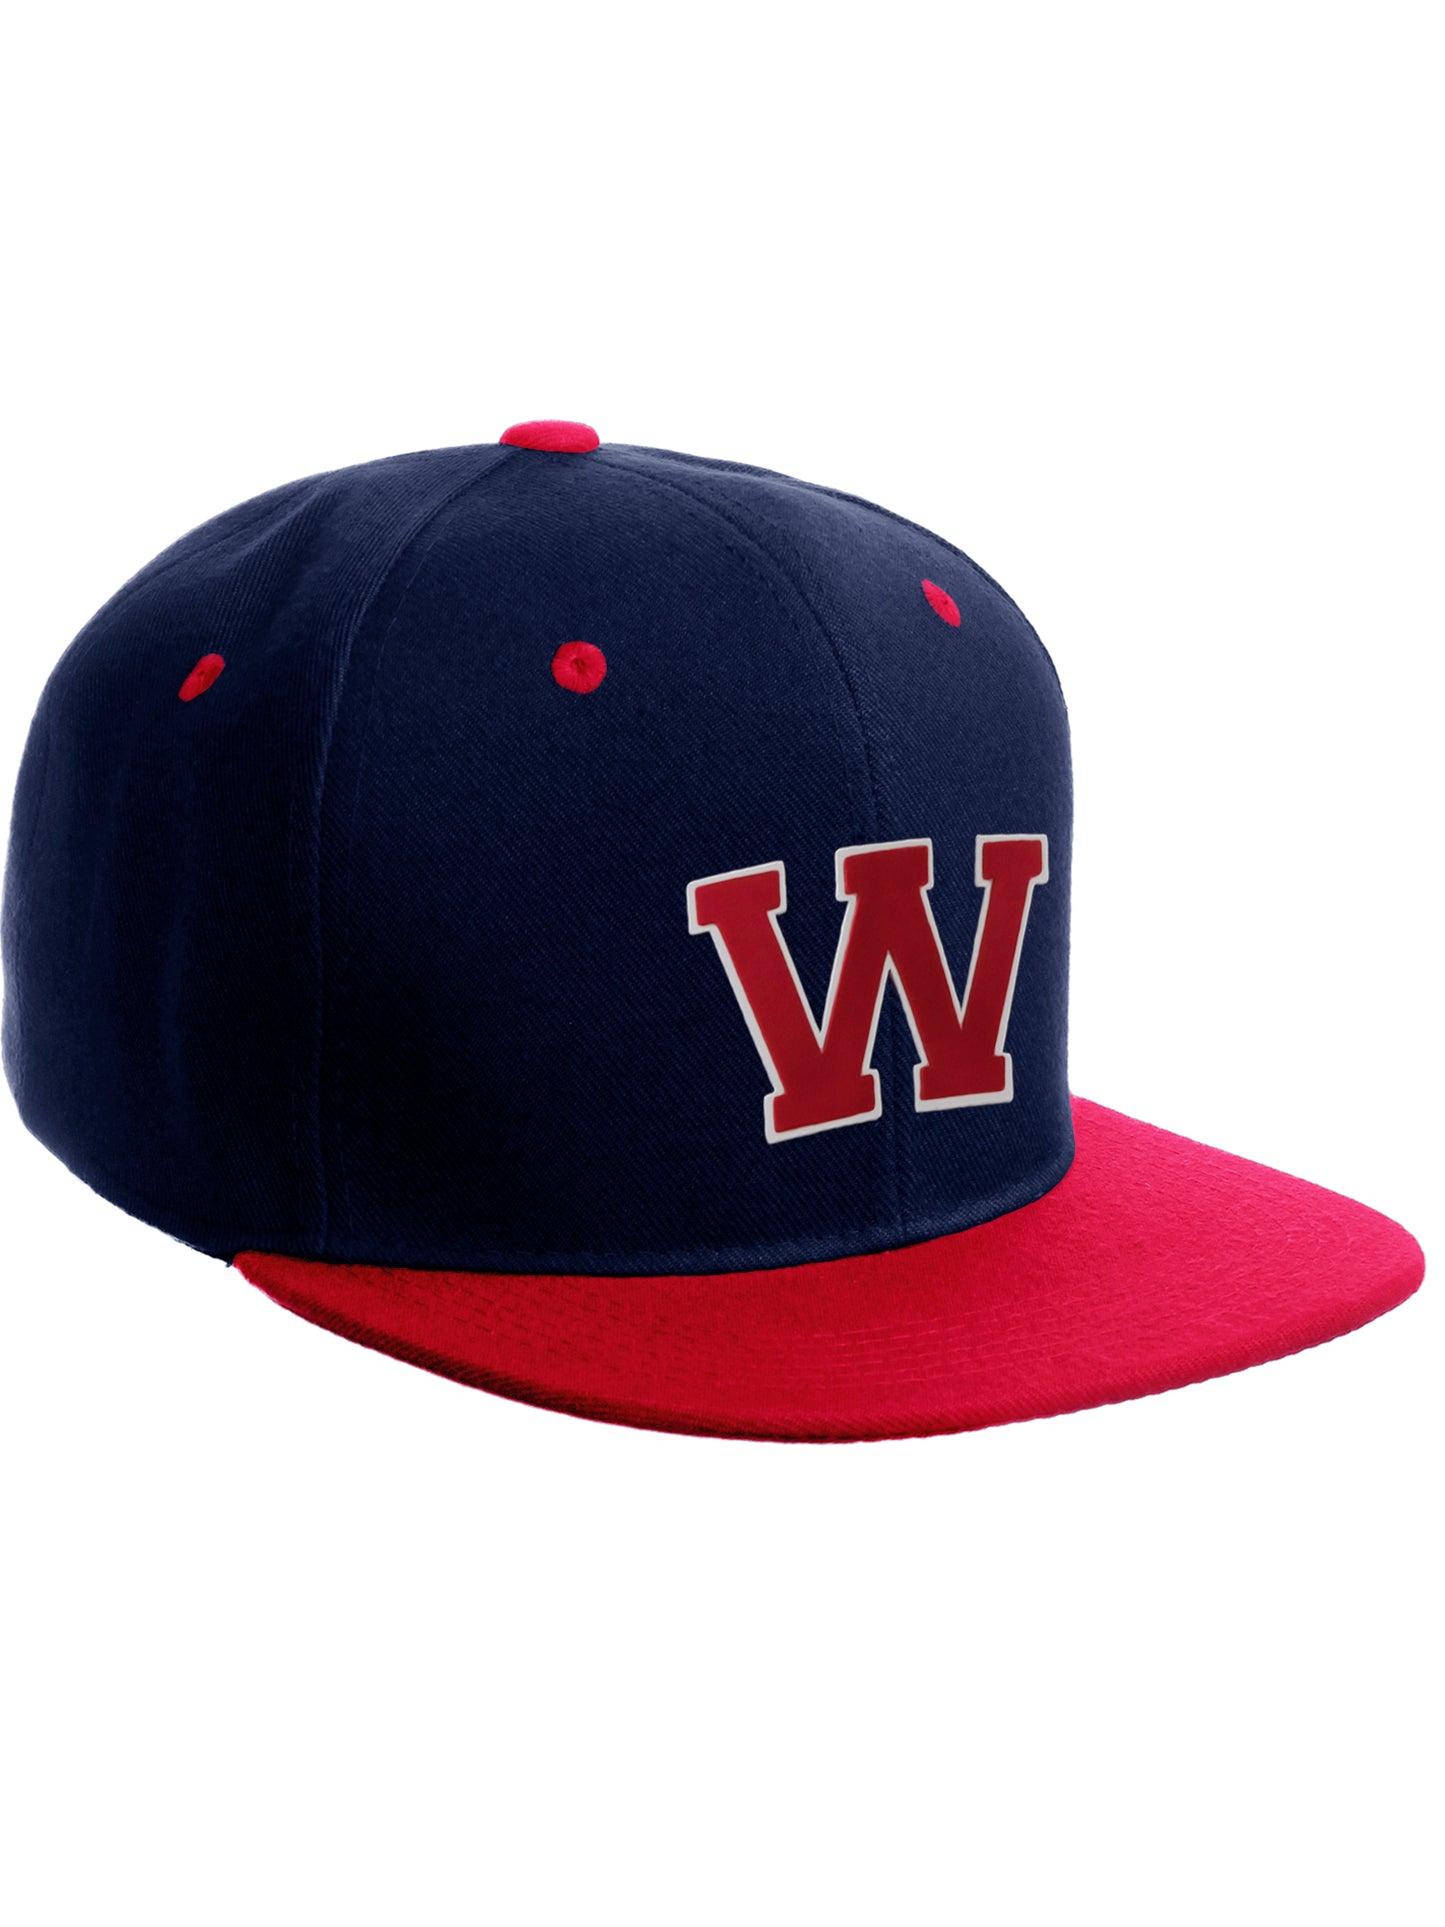 Classic Snapback Hat Custom A to Z Initial Letters, Navy Red Cap White Red